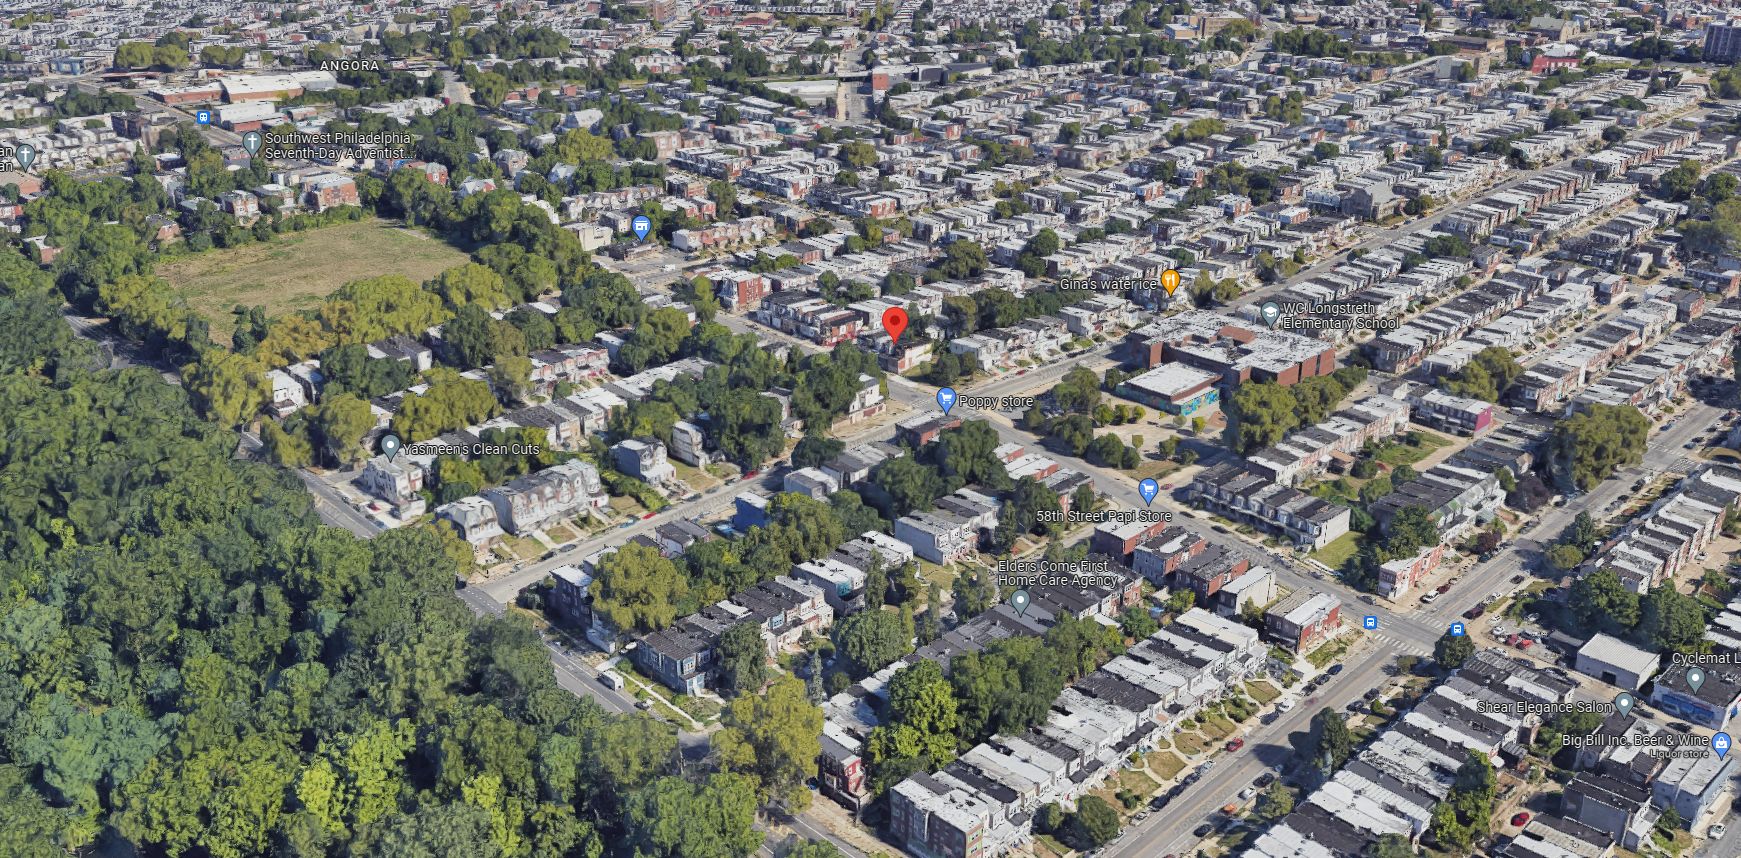 1437 South 58th Street. Aerial view prior to redevelopment. Looking north. Credit: Google Maps